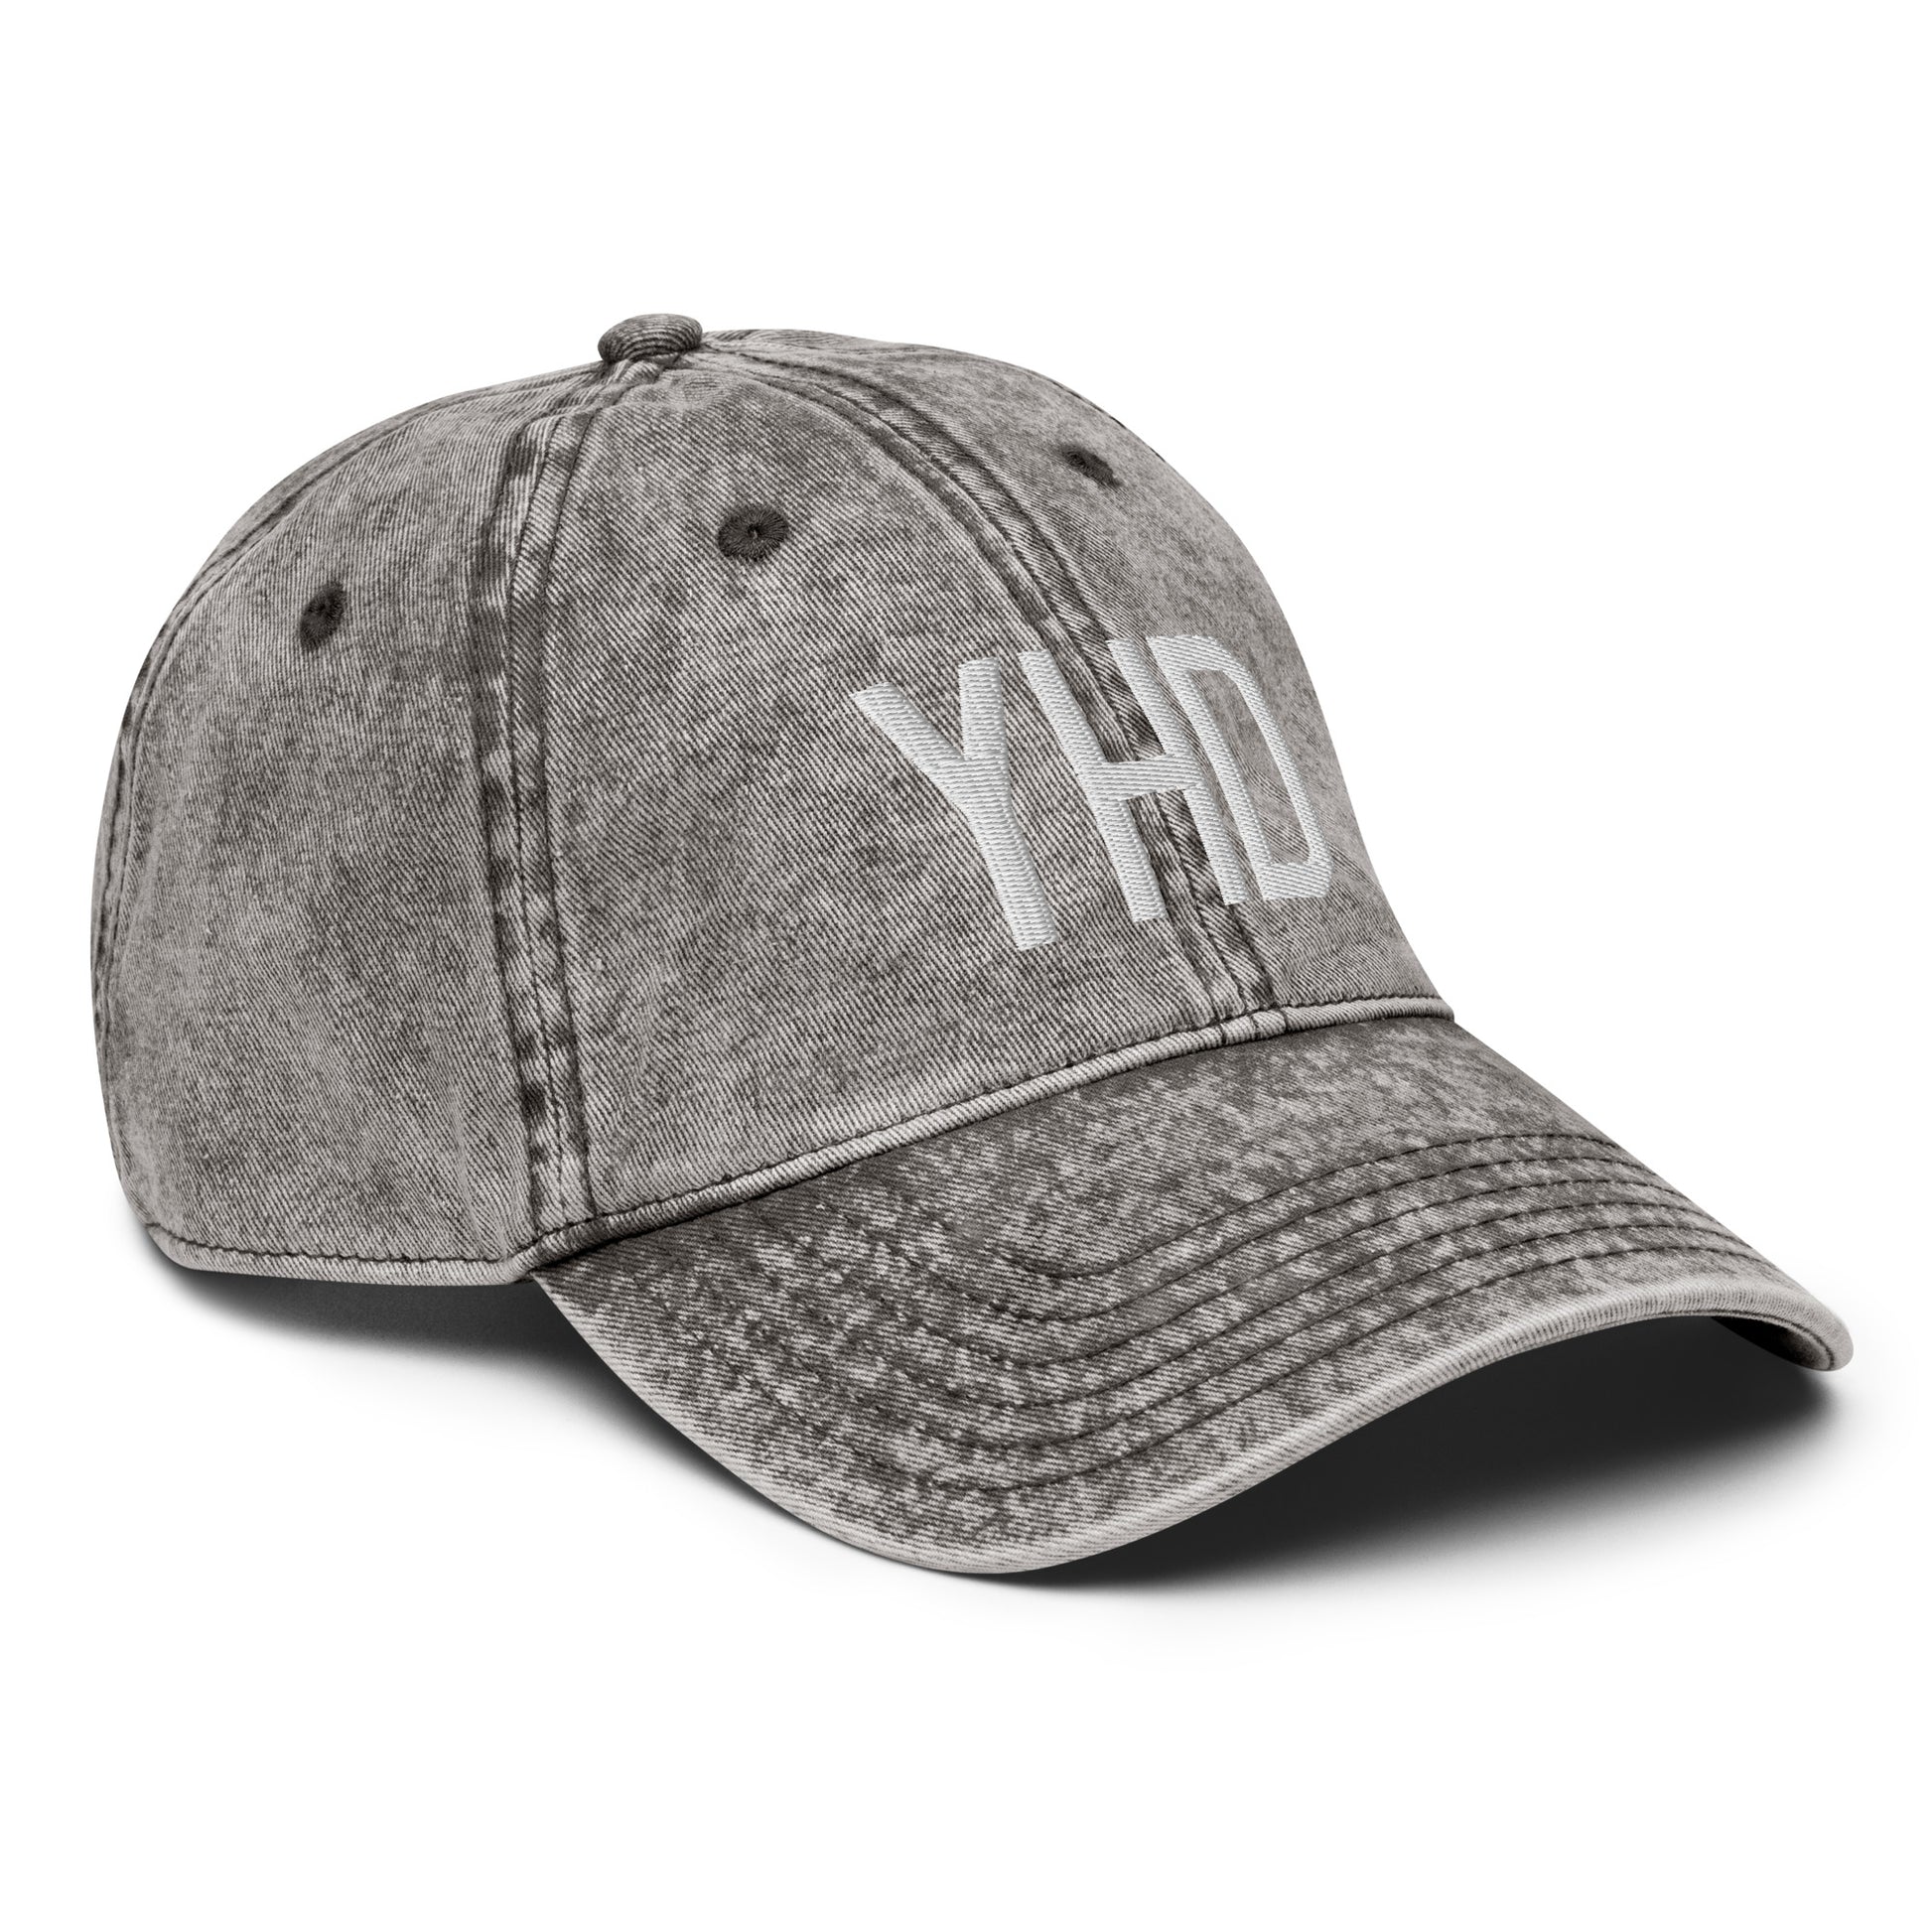 Airport Code Twill Cap - White • YHD Dryden • YHM Designs - Image 30